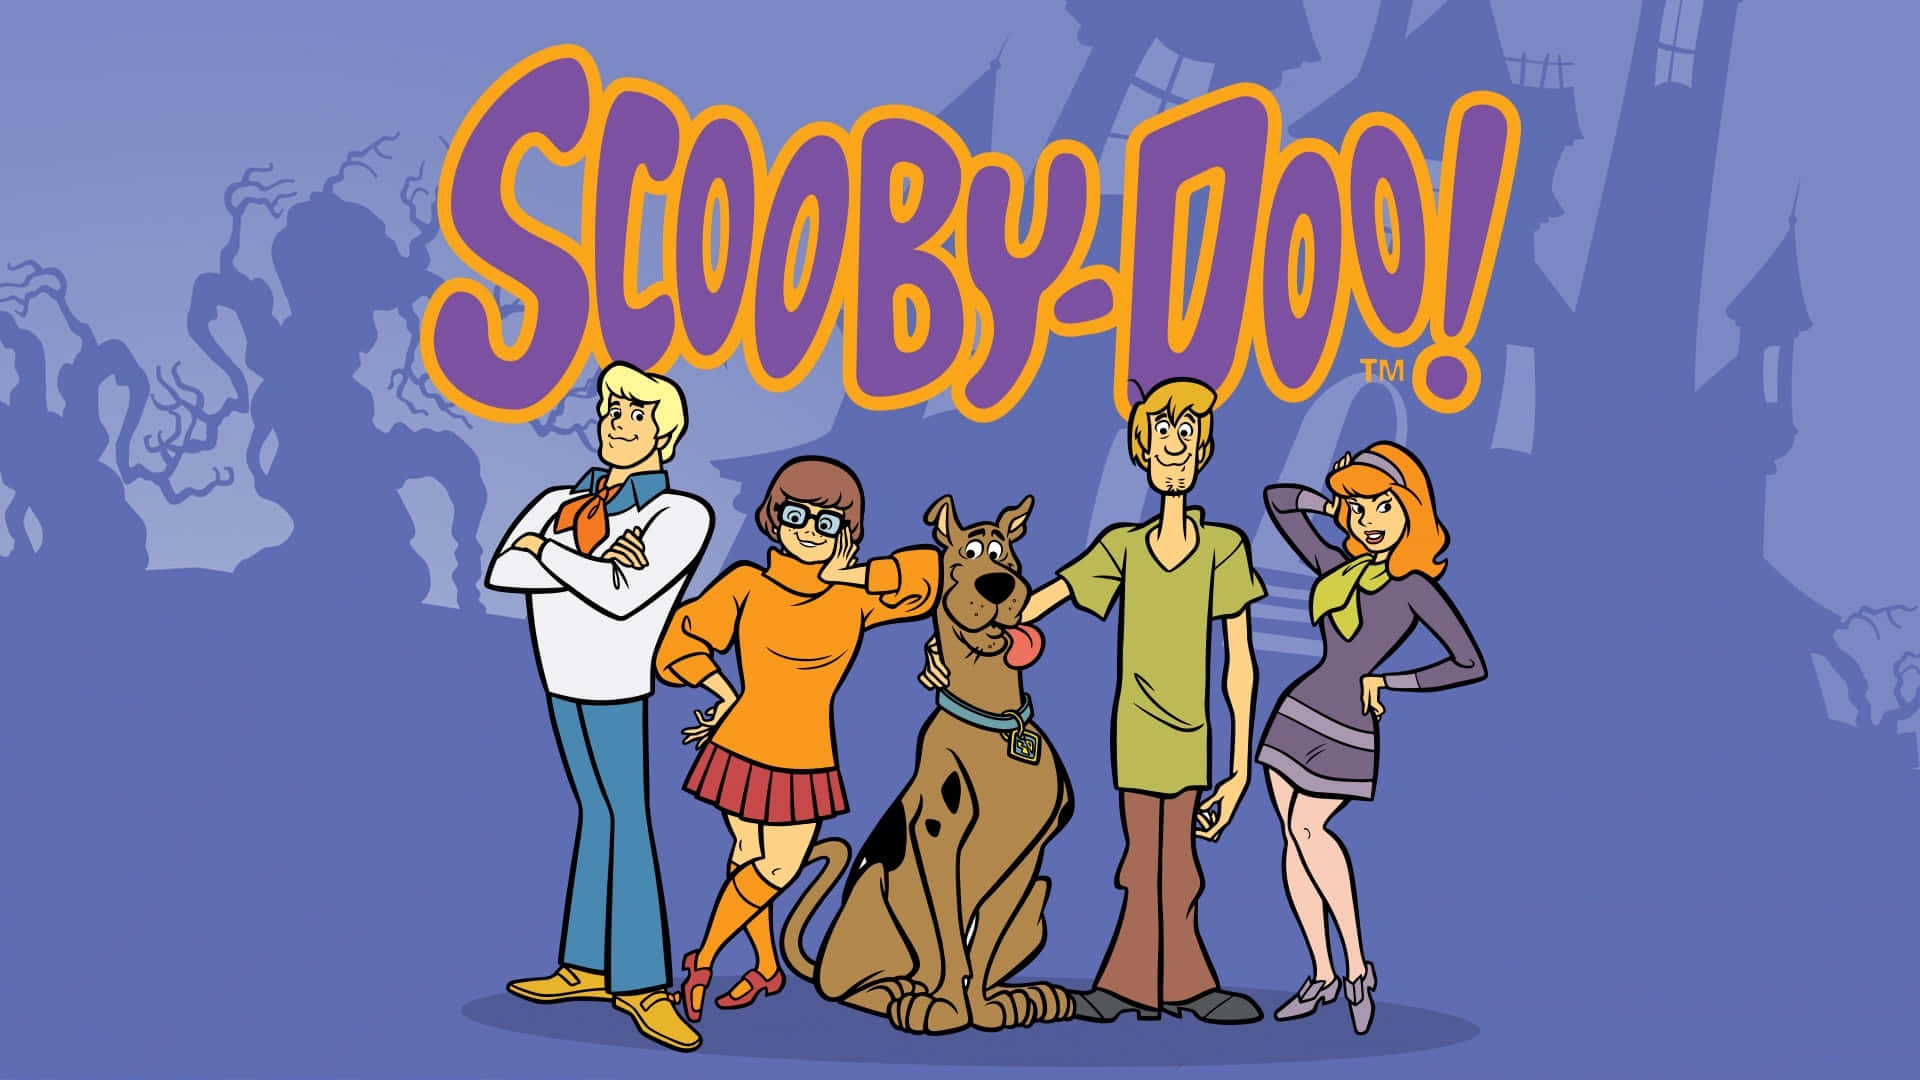 The Scooby-Doo gang ready to solve the mystery!